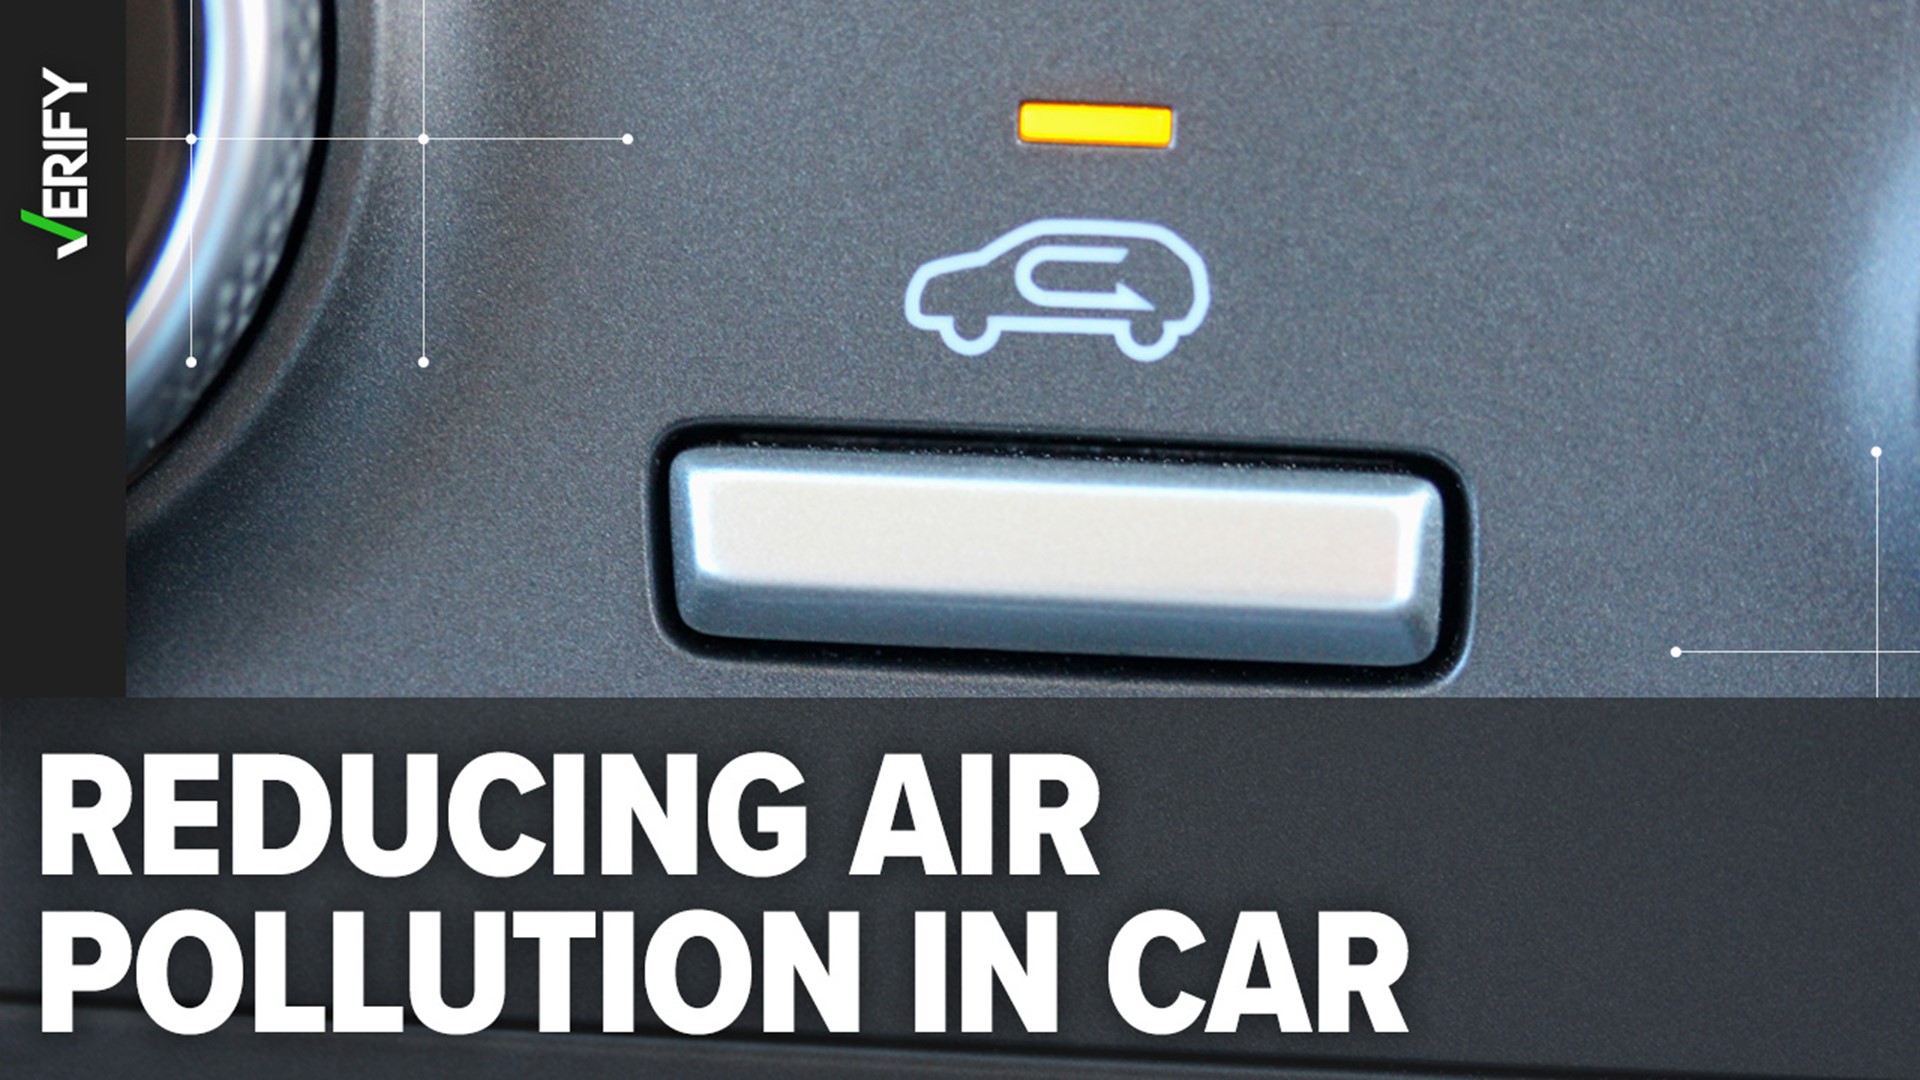 The recirculation setting recycles the air in the cabin instead of pulling fresh air from outside, which can reduce the amount of pollution that gets inside the car.